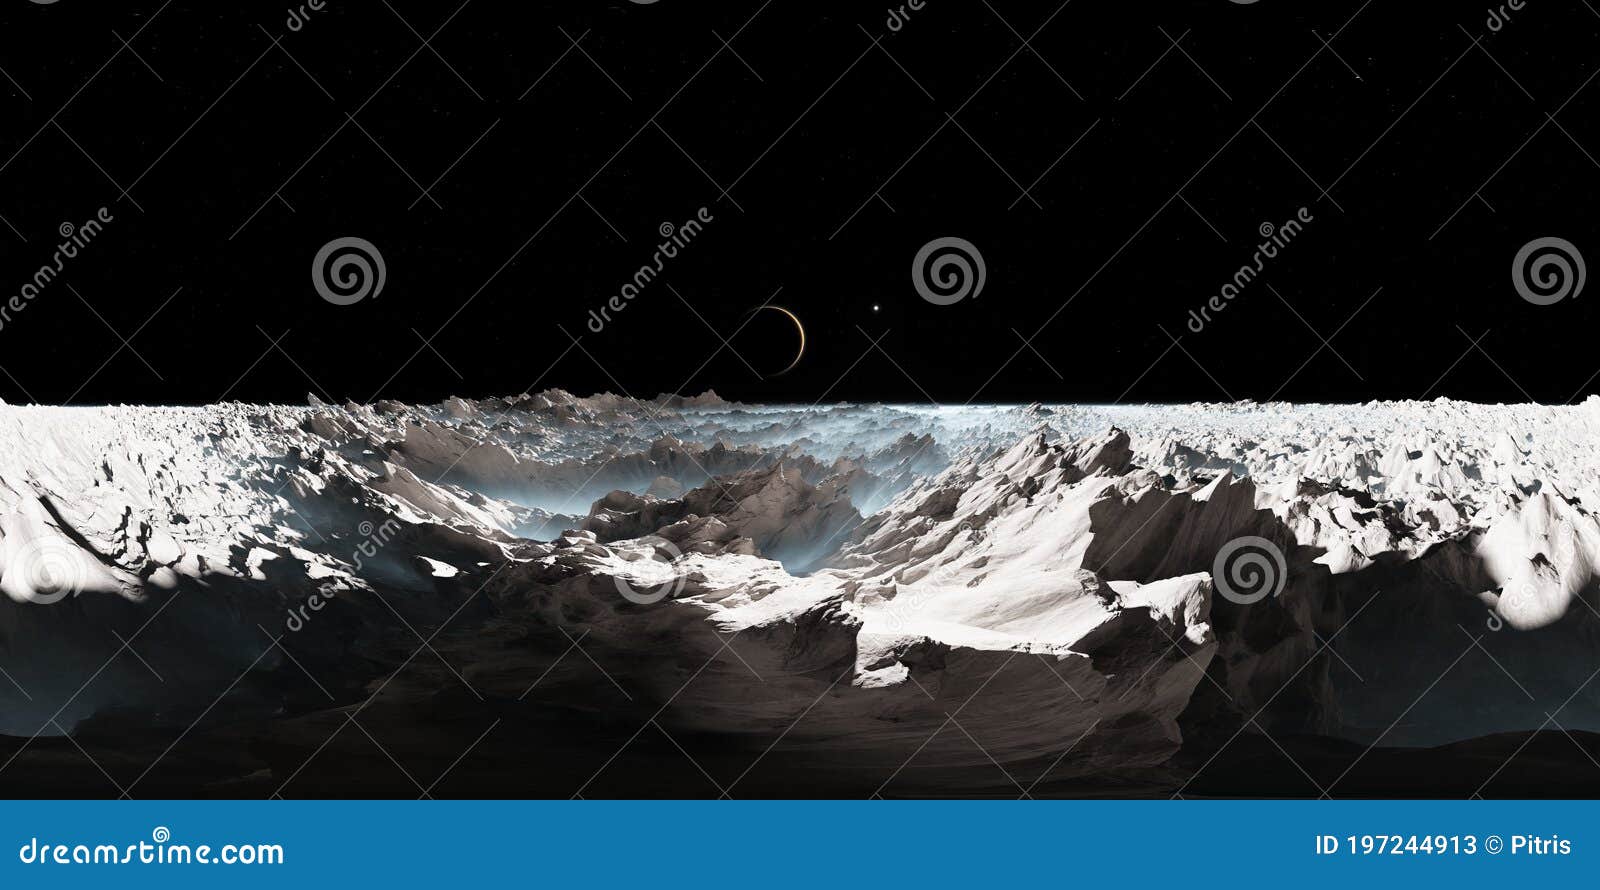 360 degree europa surface, mysterious icy moon of jupiter, equirectangular projection, environment map. hdri spherical panorama